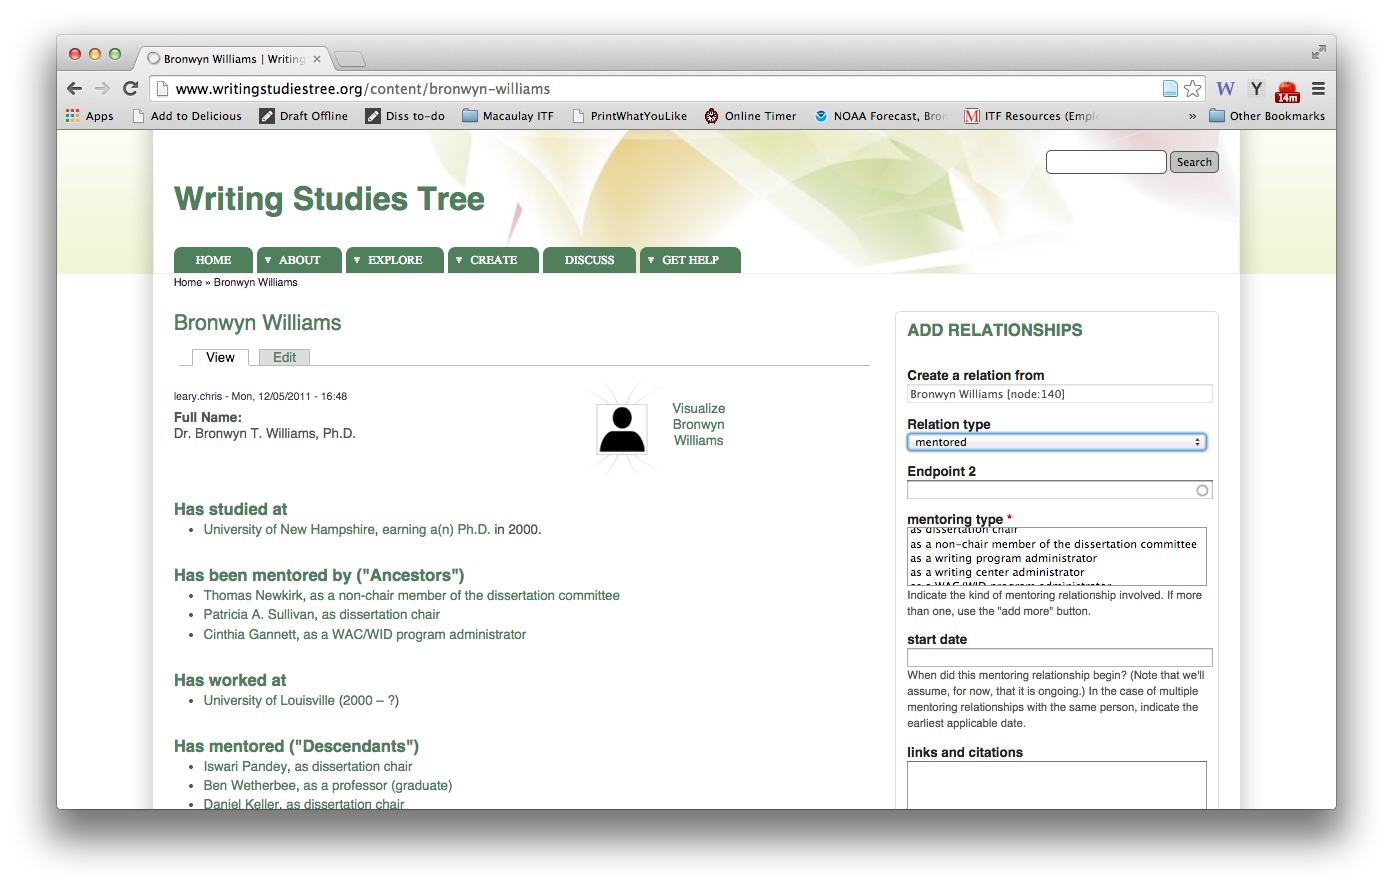 A portion of the Individual View on the Writing Studies Tree, which shows lists for where this person (Bronwyn Williams) has studied, who he has been mentored by, where he has worked, and so on. Also included is the Add Relationships box on one side of the screen, demonstrating a user beginning to create a new 'Mentored'-type relation. This box prompts the user for an 'endpoint 2,' i.e. the person mentored by Williams, as well as a specific mentoring subtype (as dissertation chair, as a writing program administrator, etc). Further fields shown are 'start date' and 'links and citations.' The box continues below the edge of the screen shown.